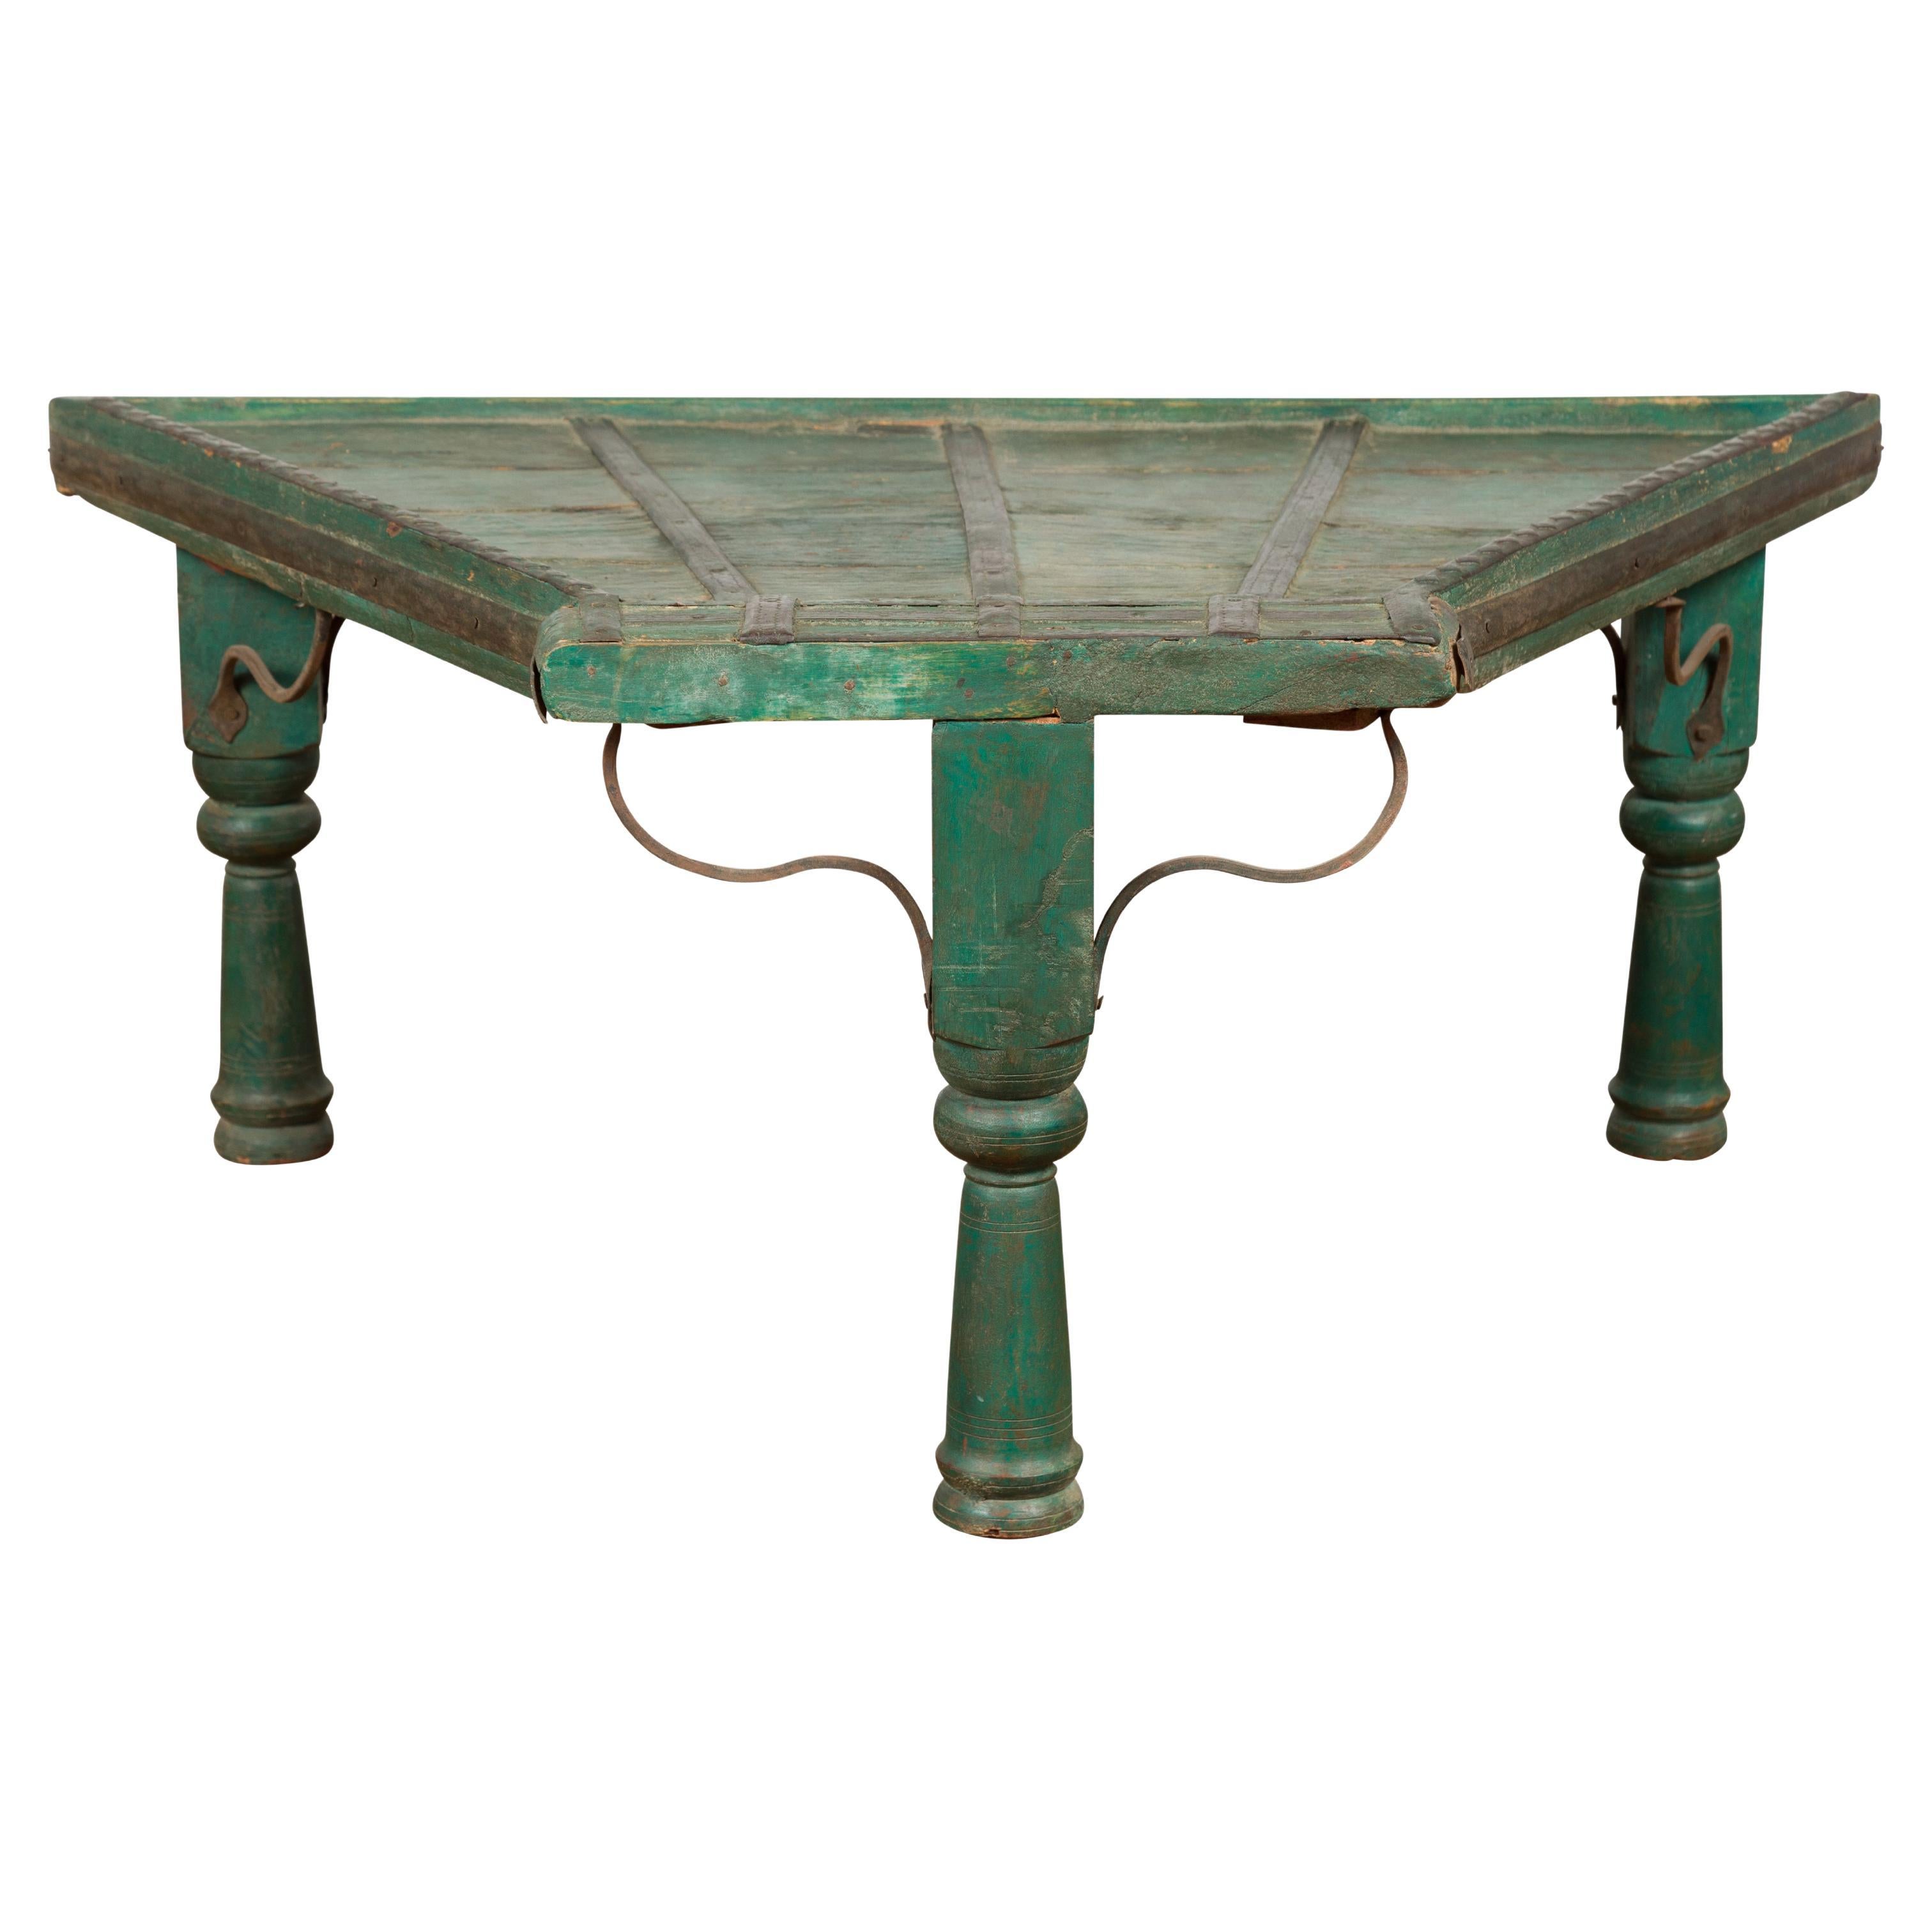 Indian 19th Century Green Painted Wood Bullock Cart Made into a Coffee Table For Sale